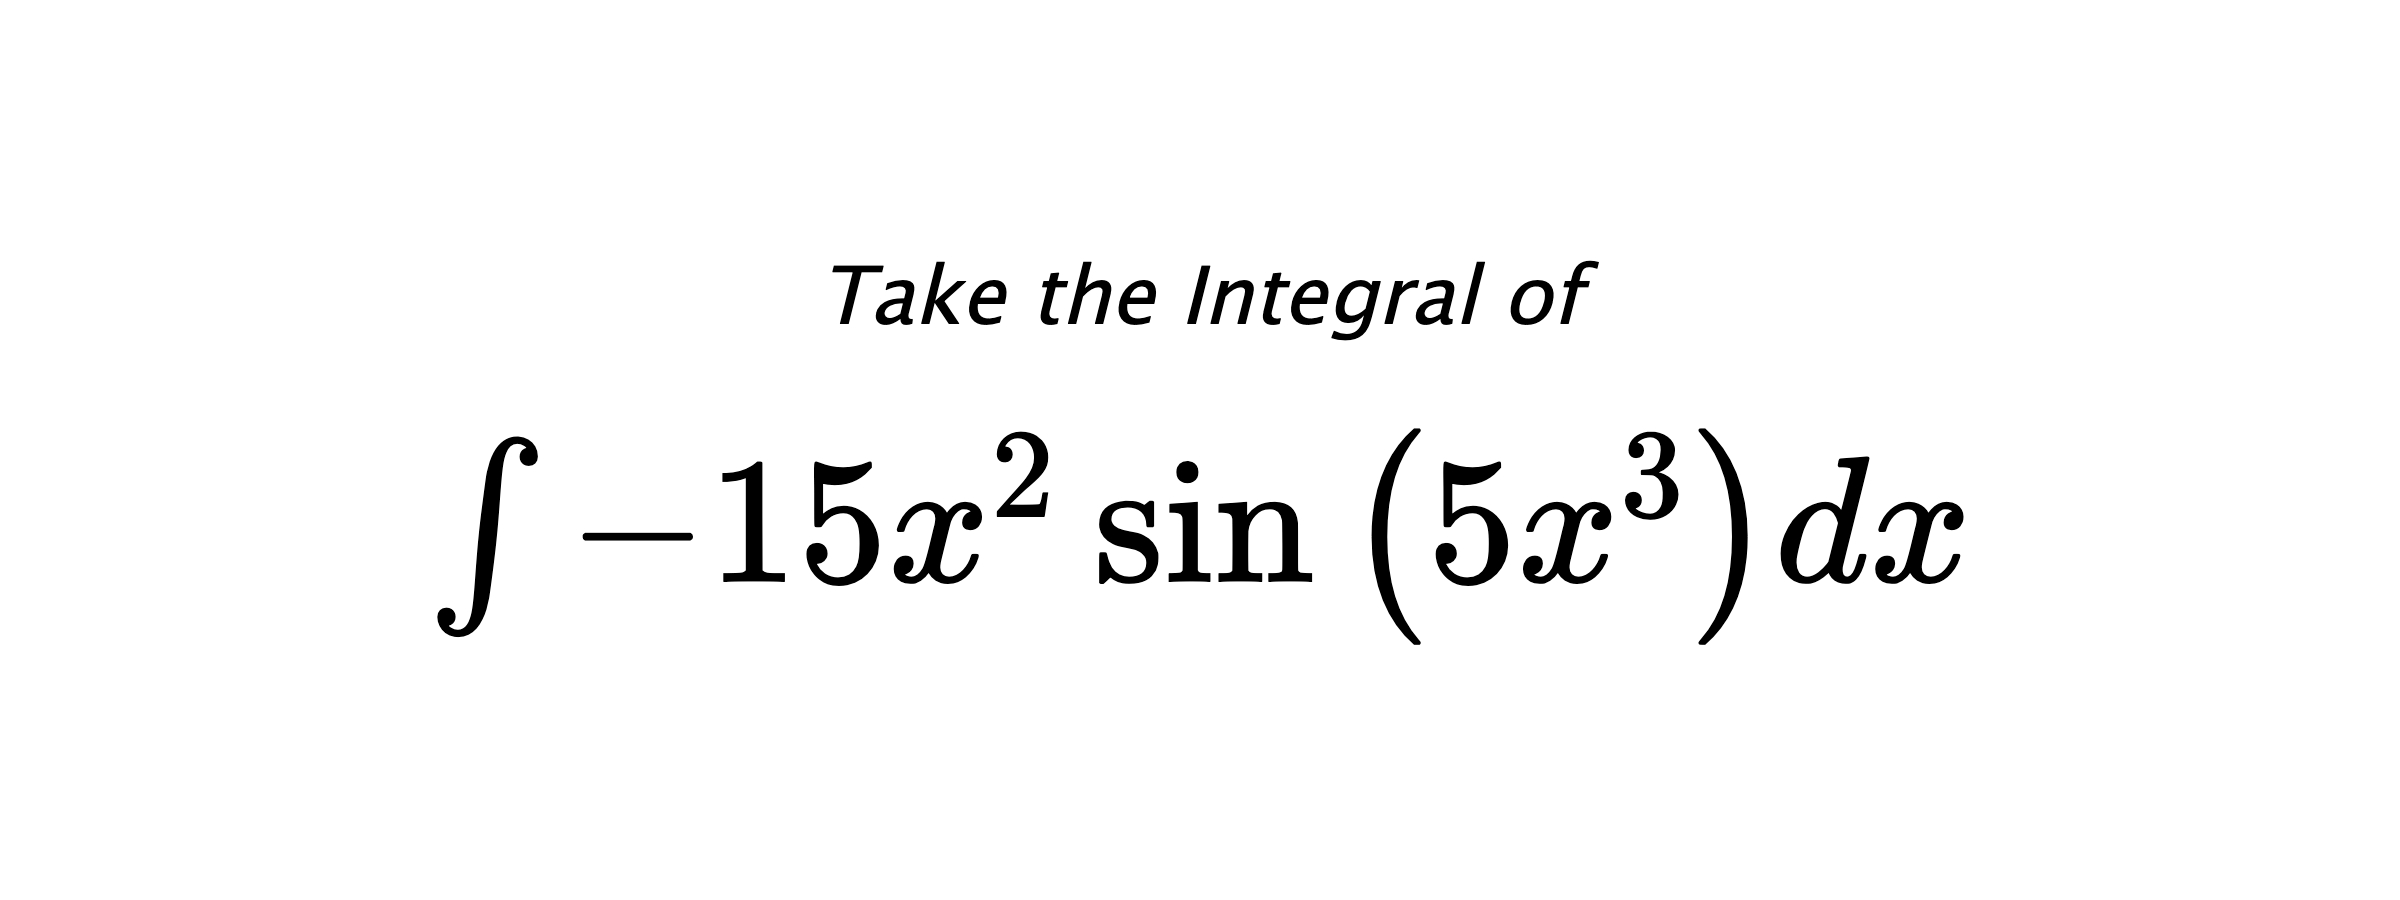 Take the Integral of $ \int - 15 x^{2} \sin{\left(5 x^{3} \right)} dx $